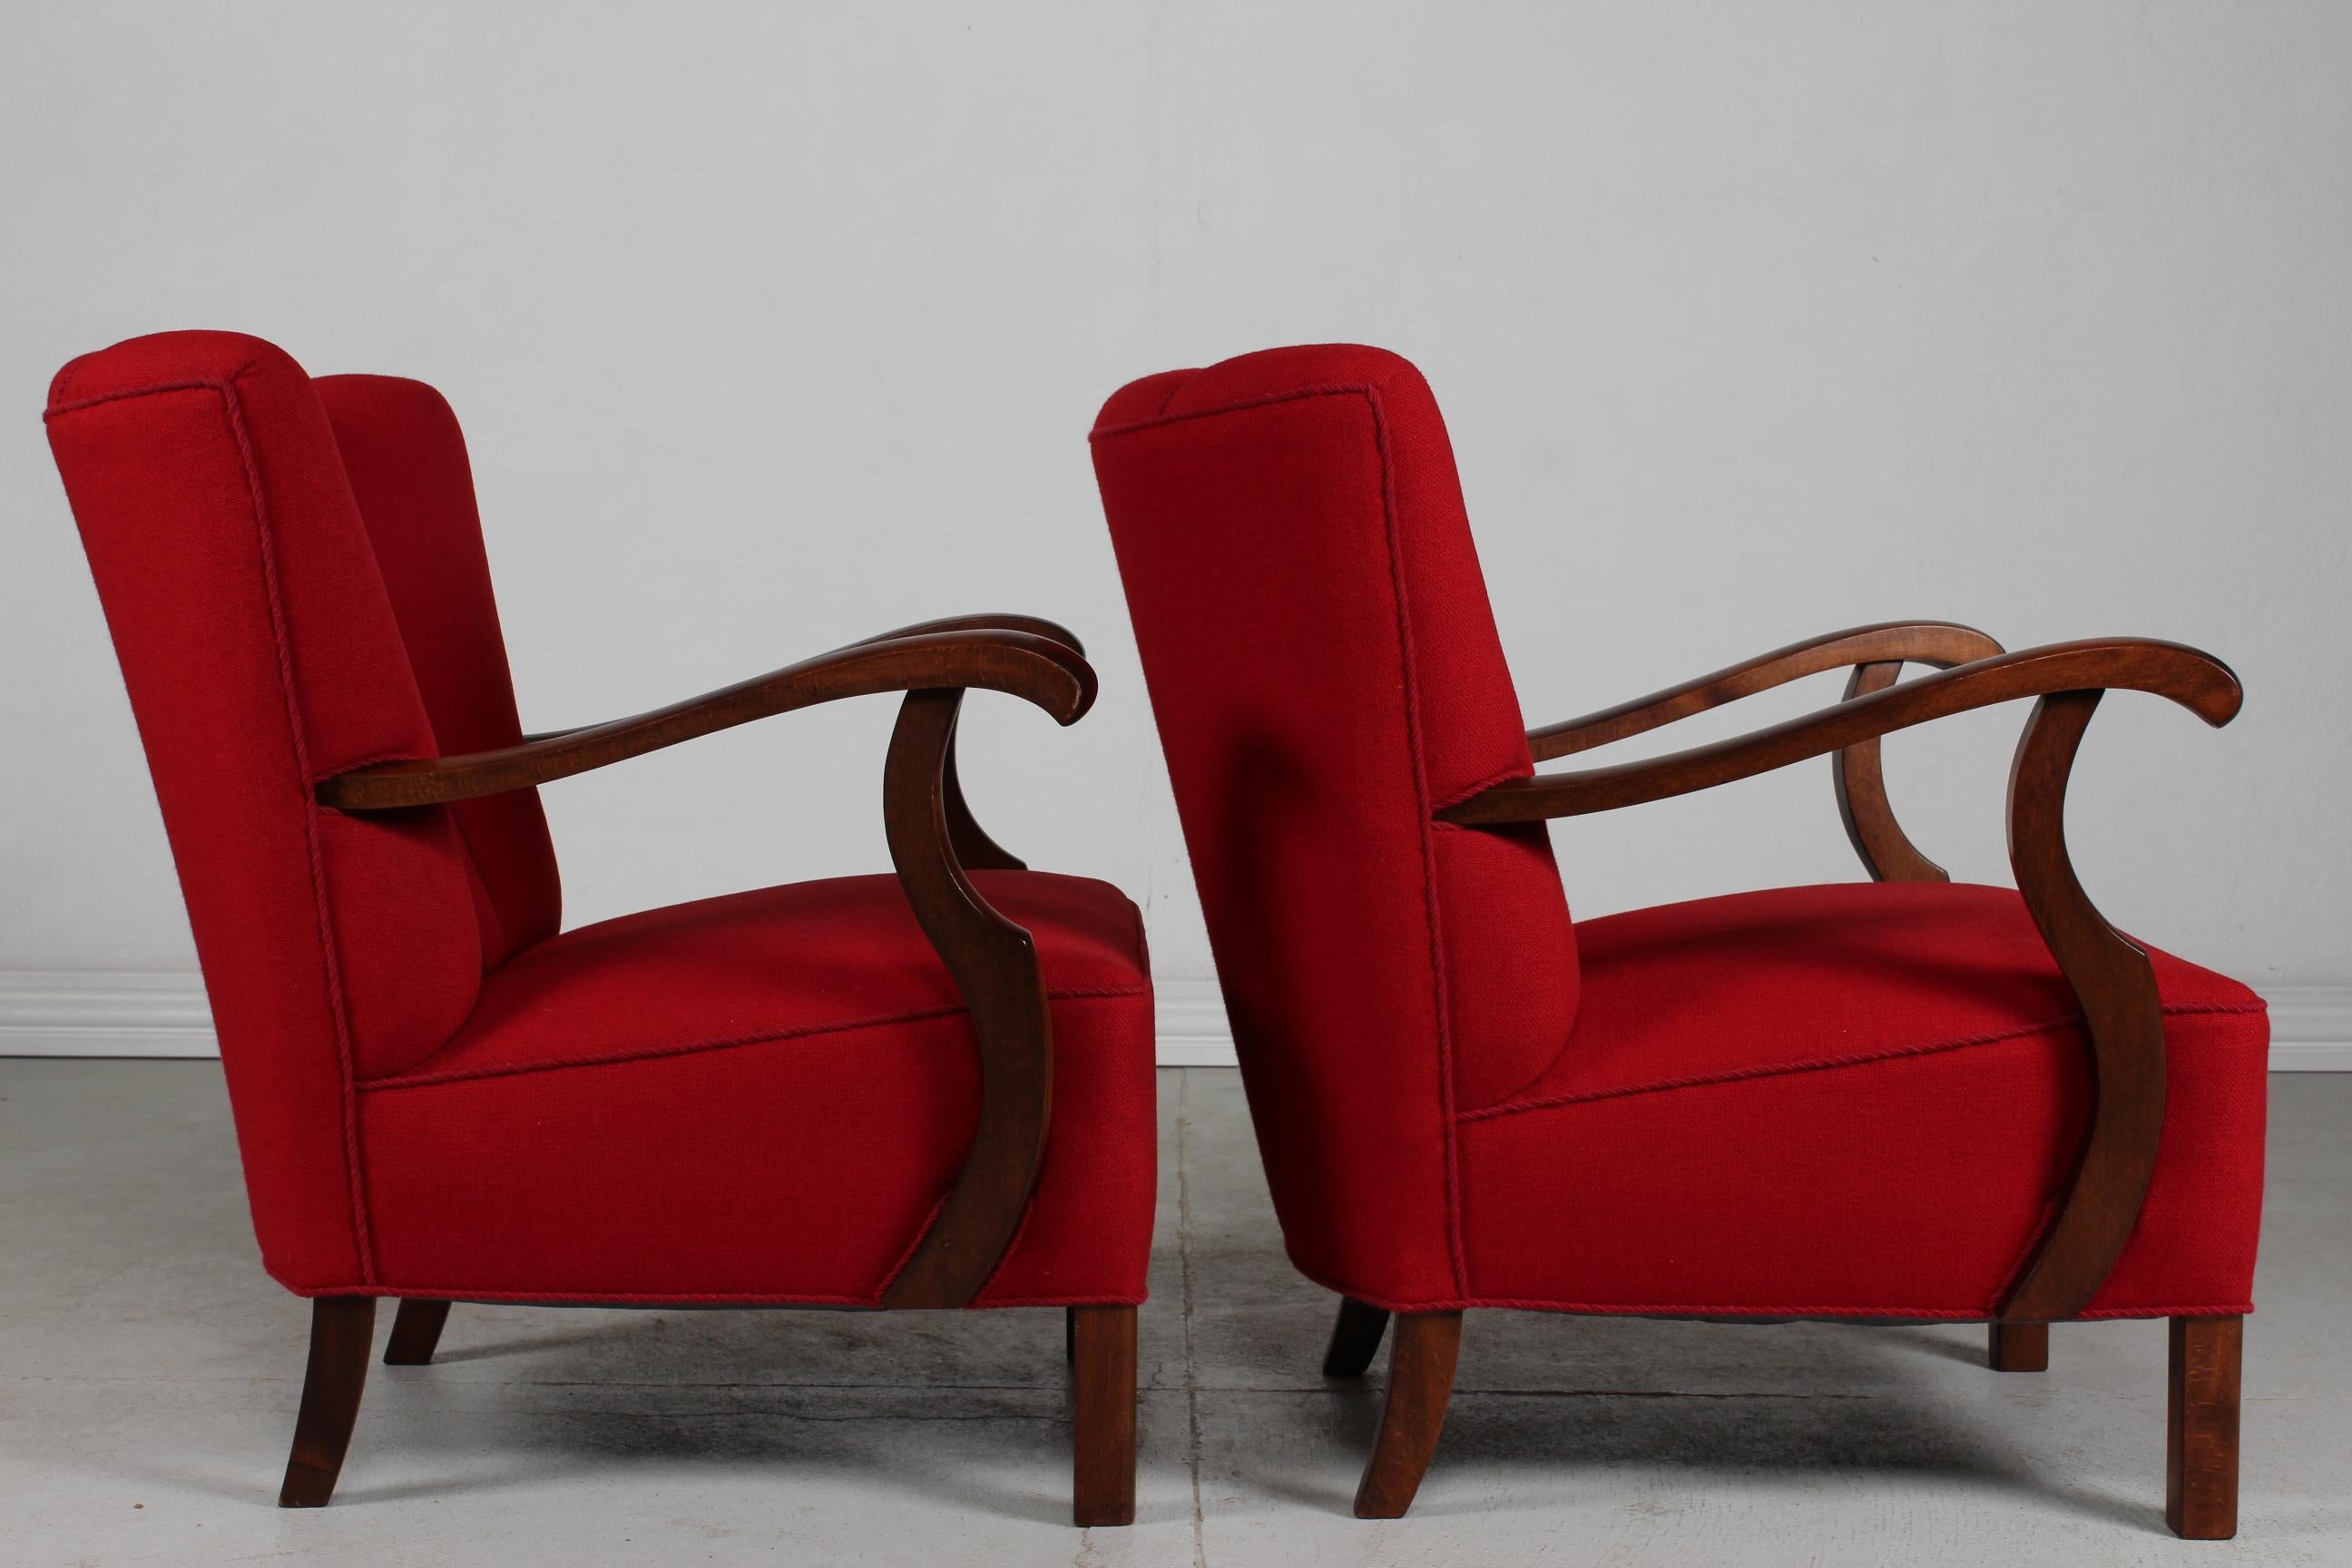 Pair of Art Deco Easy Chairs in Viggo Boesen Style with Red Wool, Denmark 1930's For Sale 6